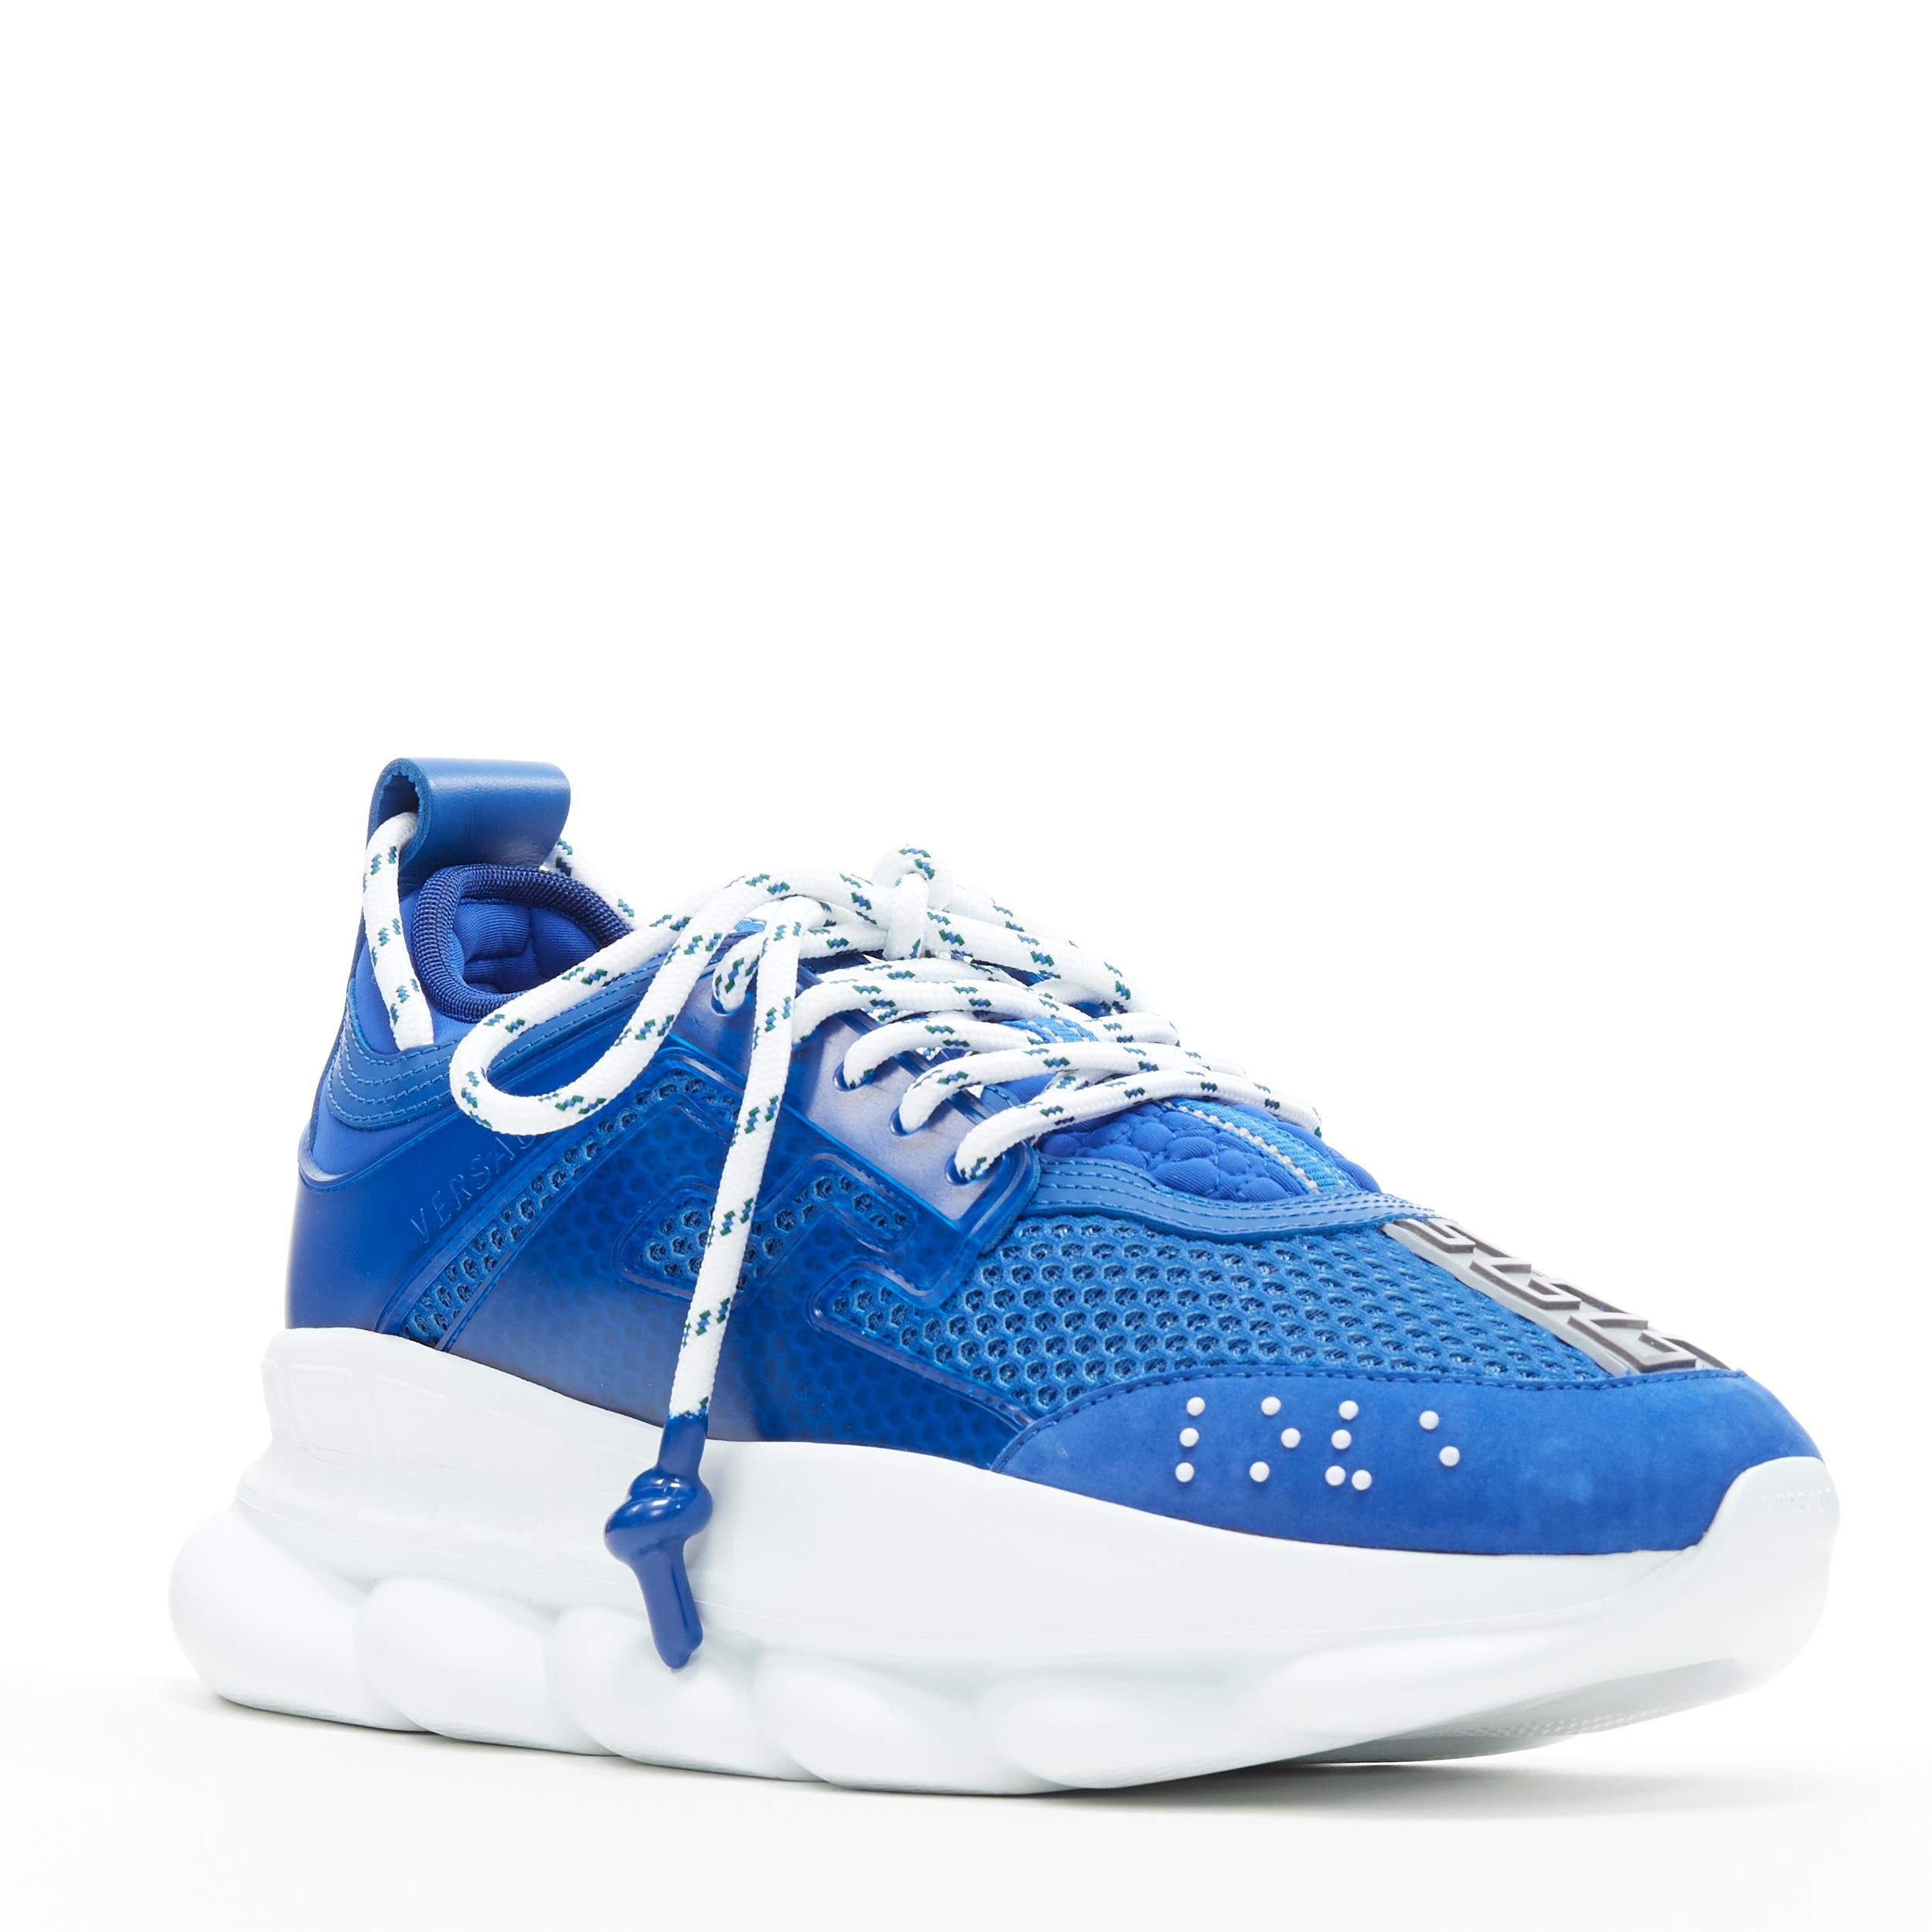 new VERSACE Chain Reaction Bluette 2 white mesh suede chunky sneaker EU39 US6 
Reference: TGAS/A05979 
Brand: Versace 
Designer: Salehe Bembury 
Model: Chain Reaction Bluette 2 
Material: Leather 
Color: Blue 
Pattern: Solid 
Closure: Lace up 
Extra